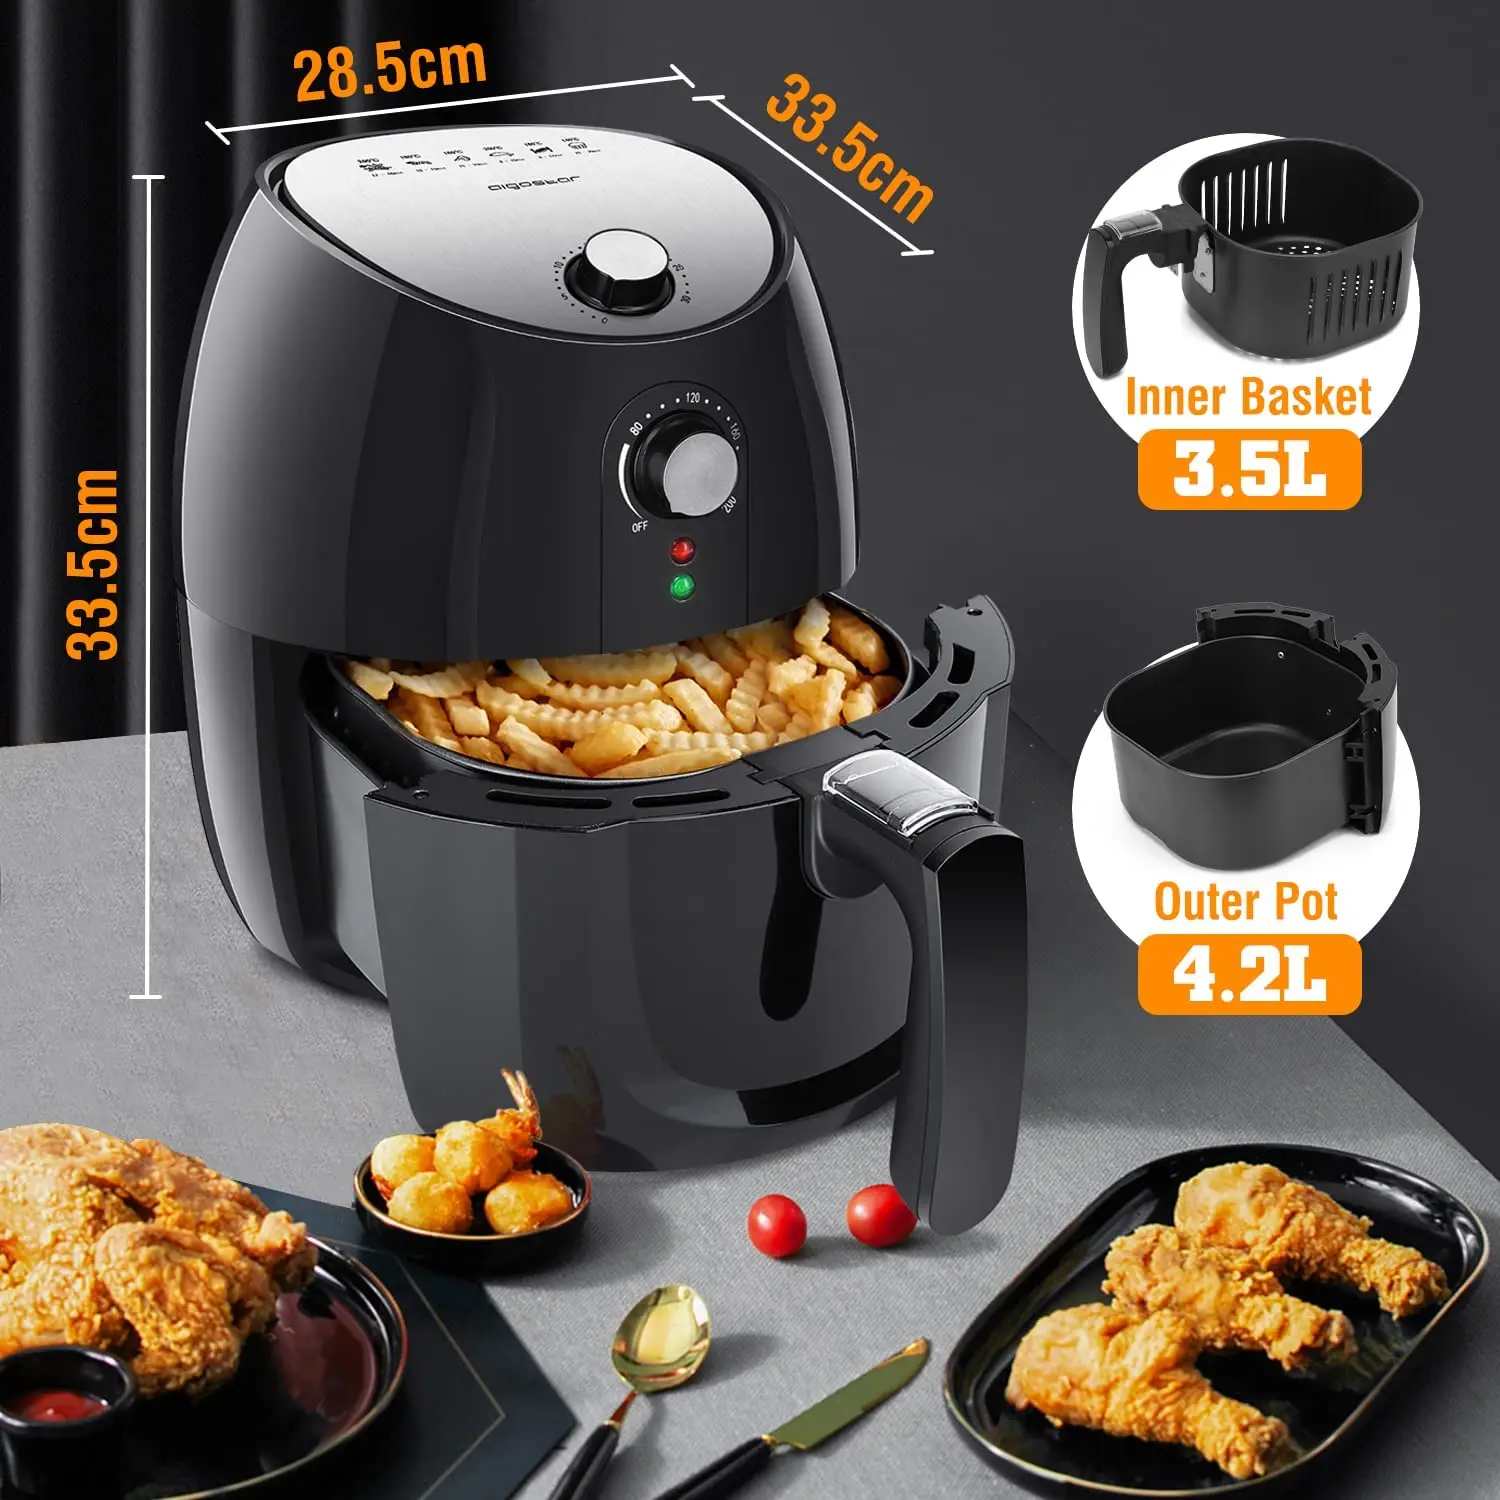 220V 1500W 3.5L Electric Air Fryer Oil Free Kitchen Oven Healthy Cooker  Airfryer with Removable Basket